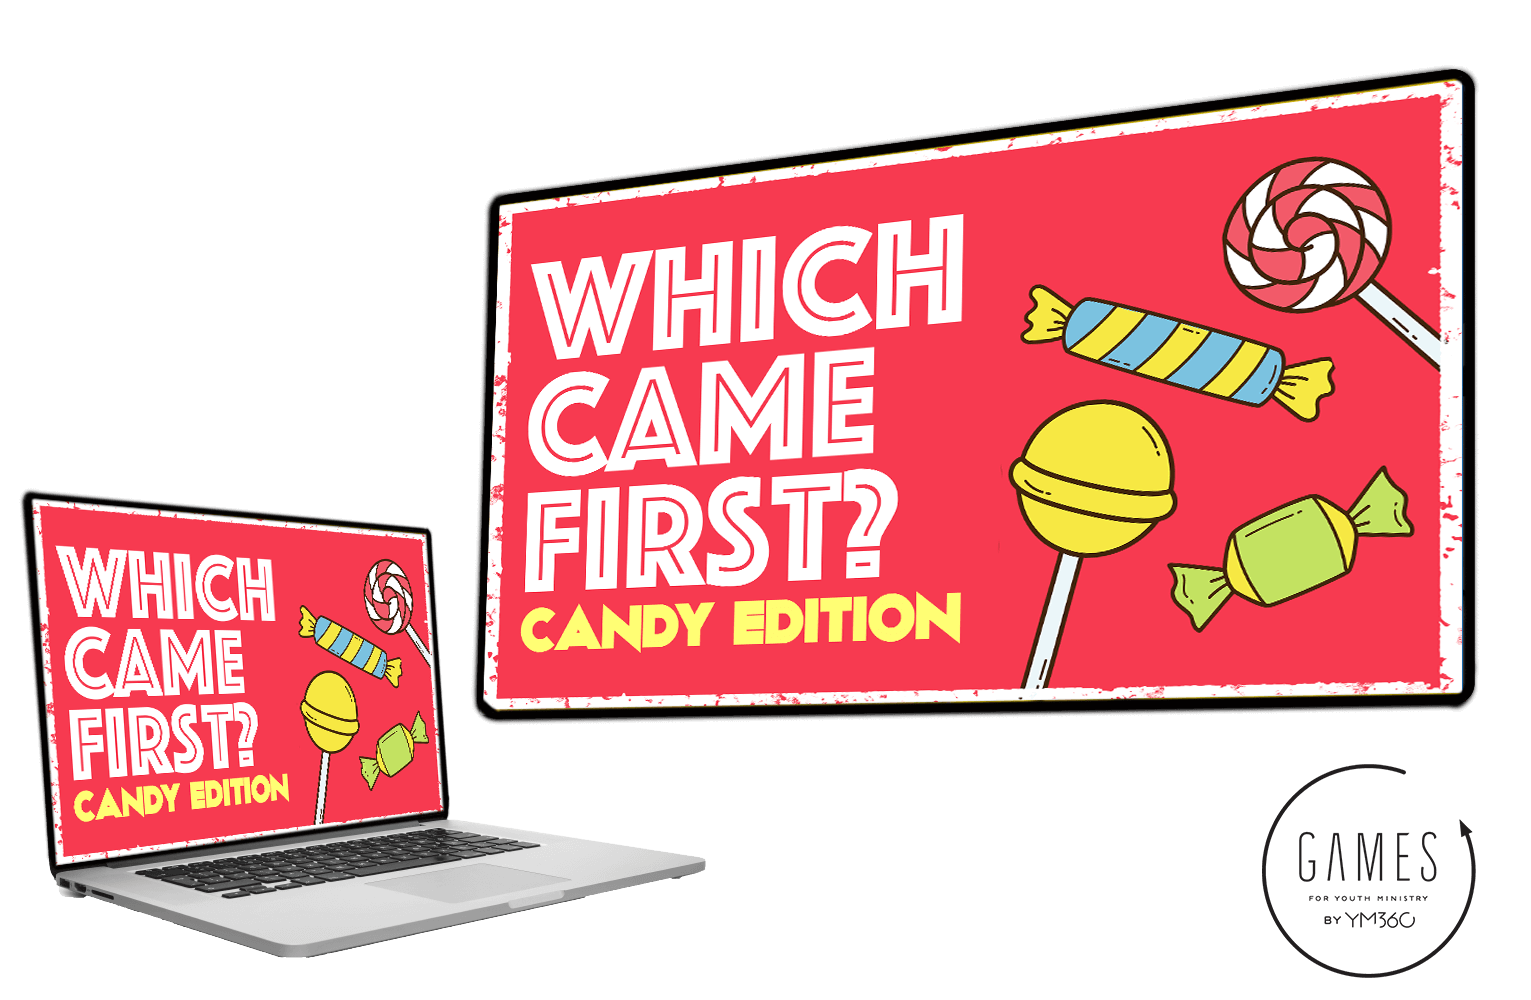 Which Came First: Candy Edition